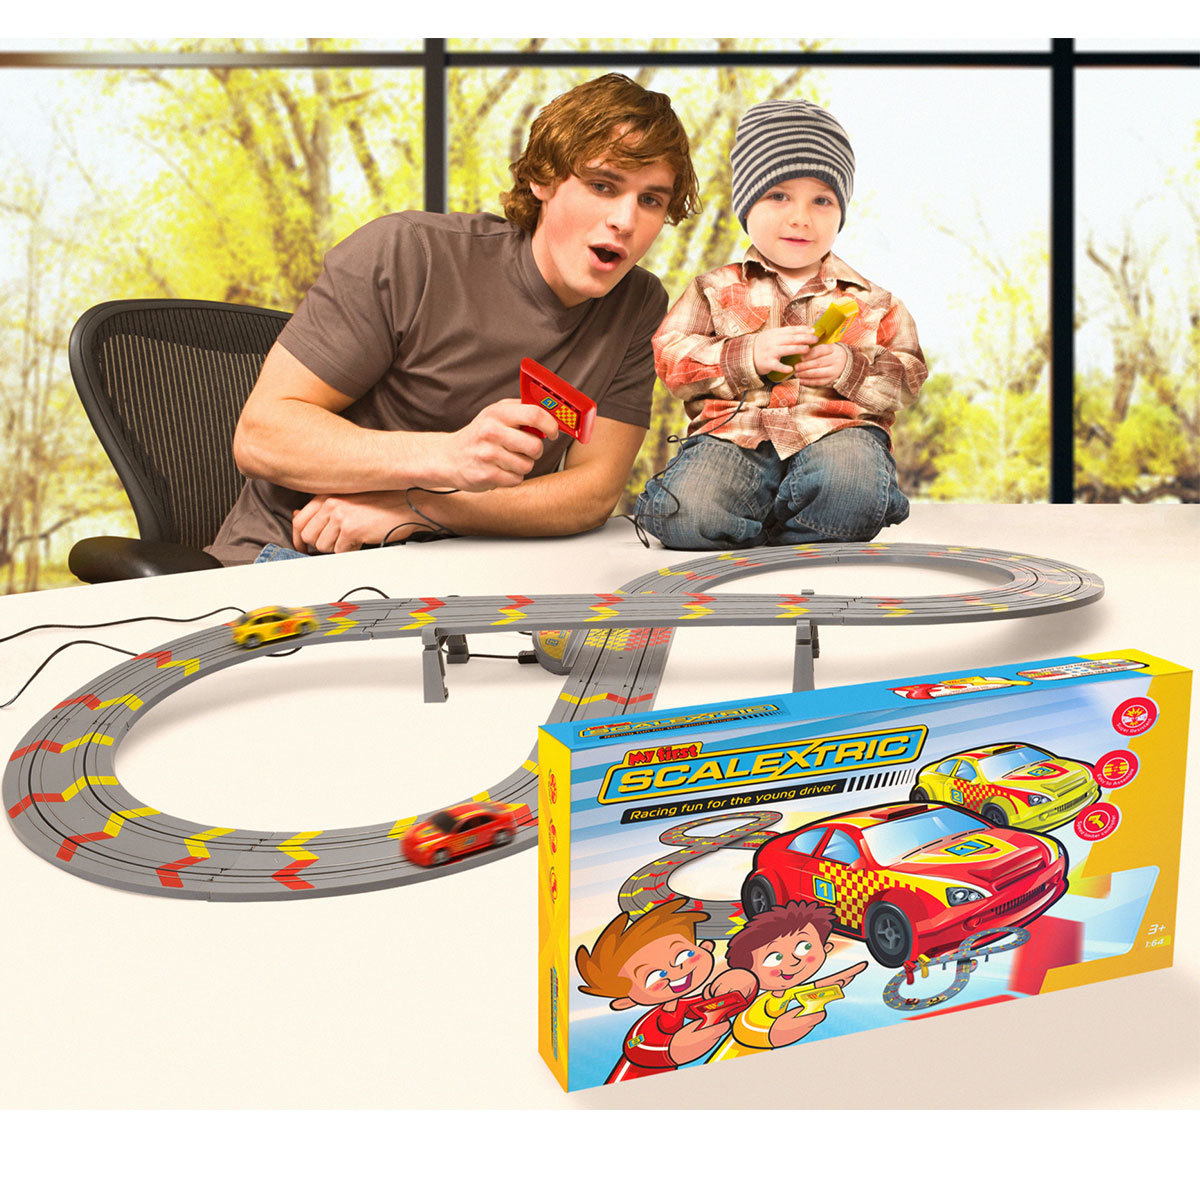 2 boys playing My First Scalextric Set